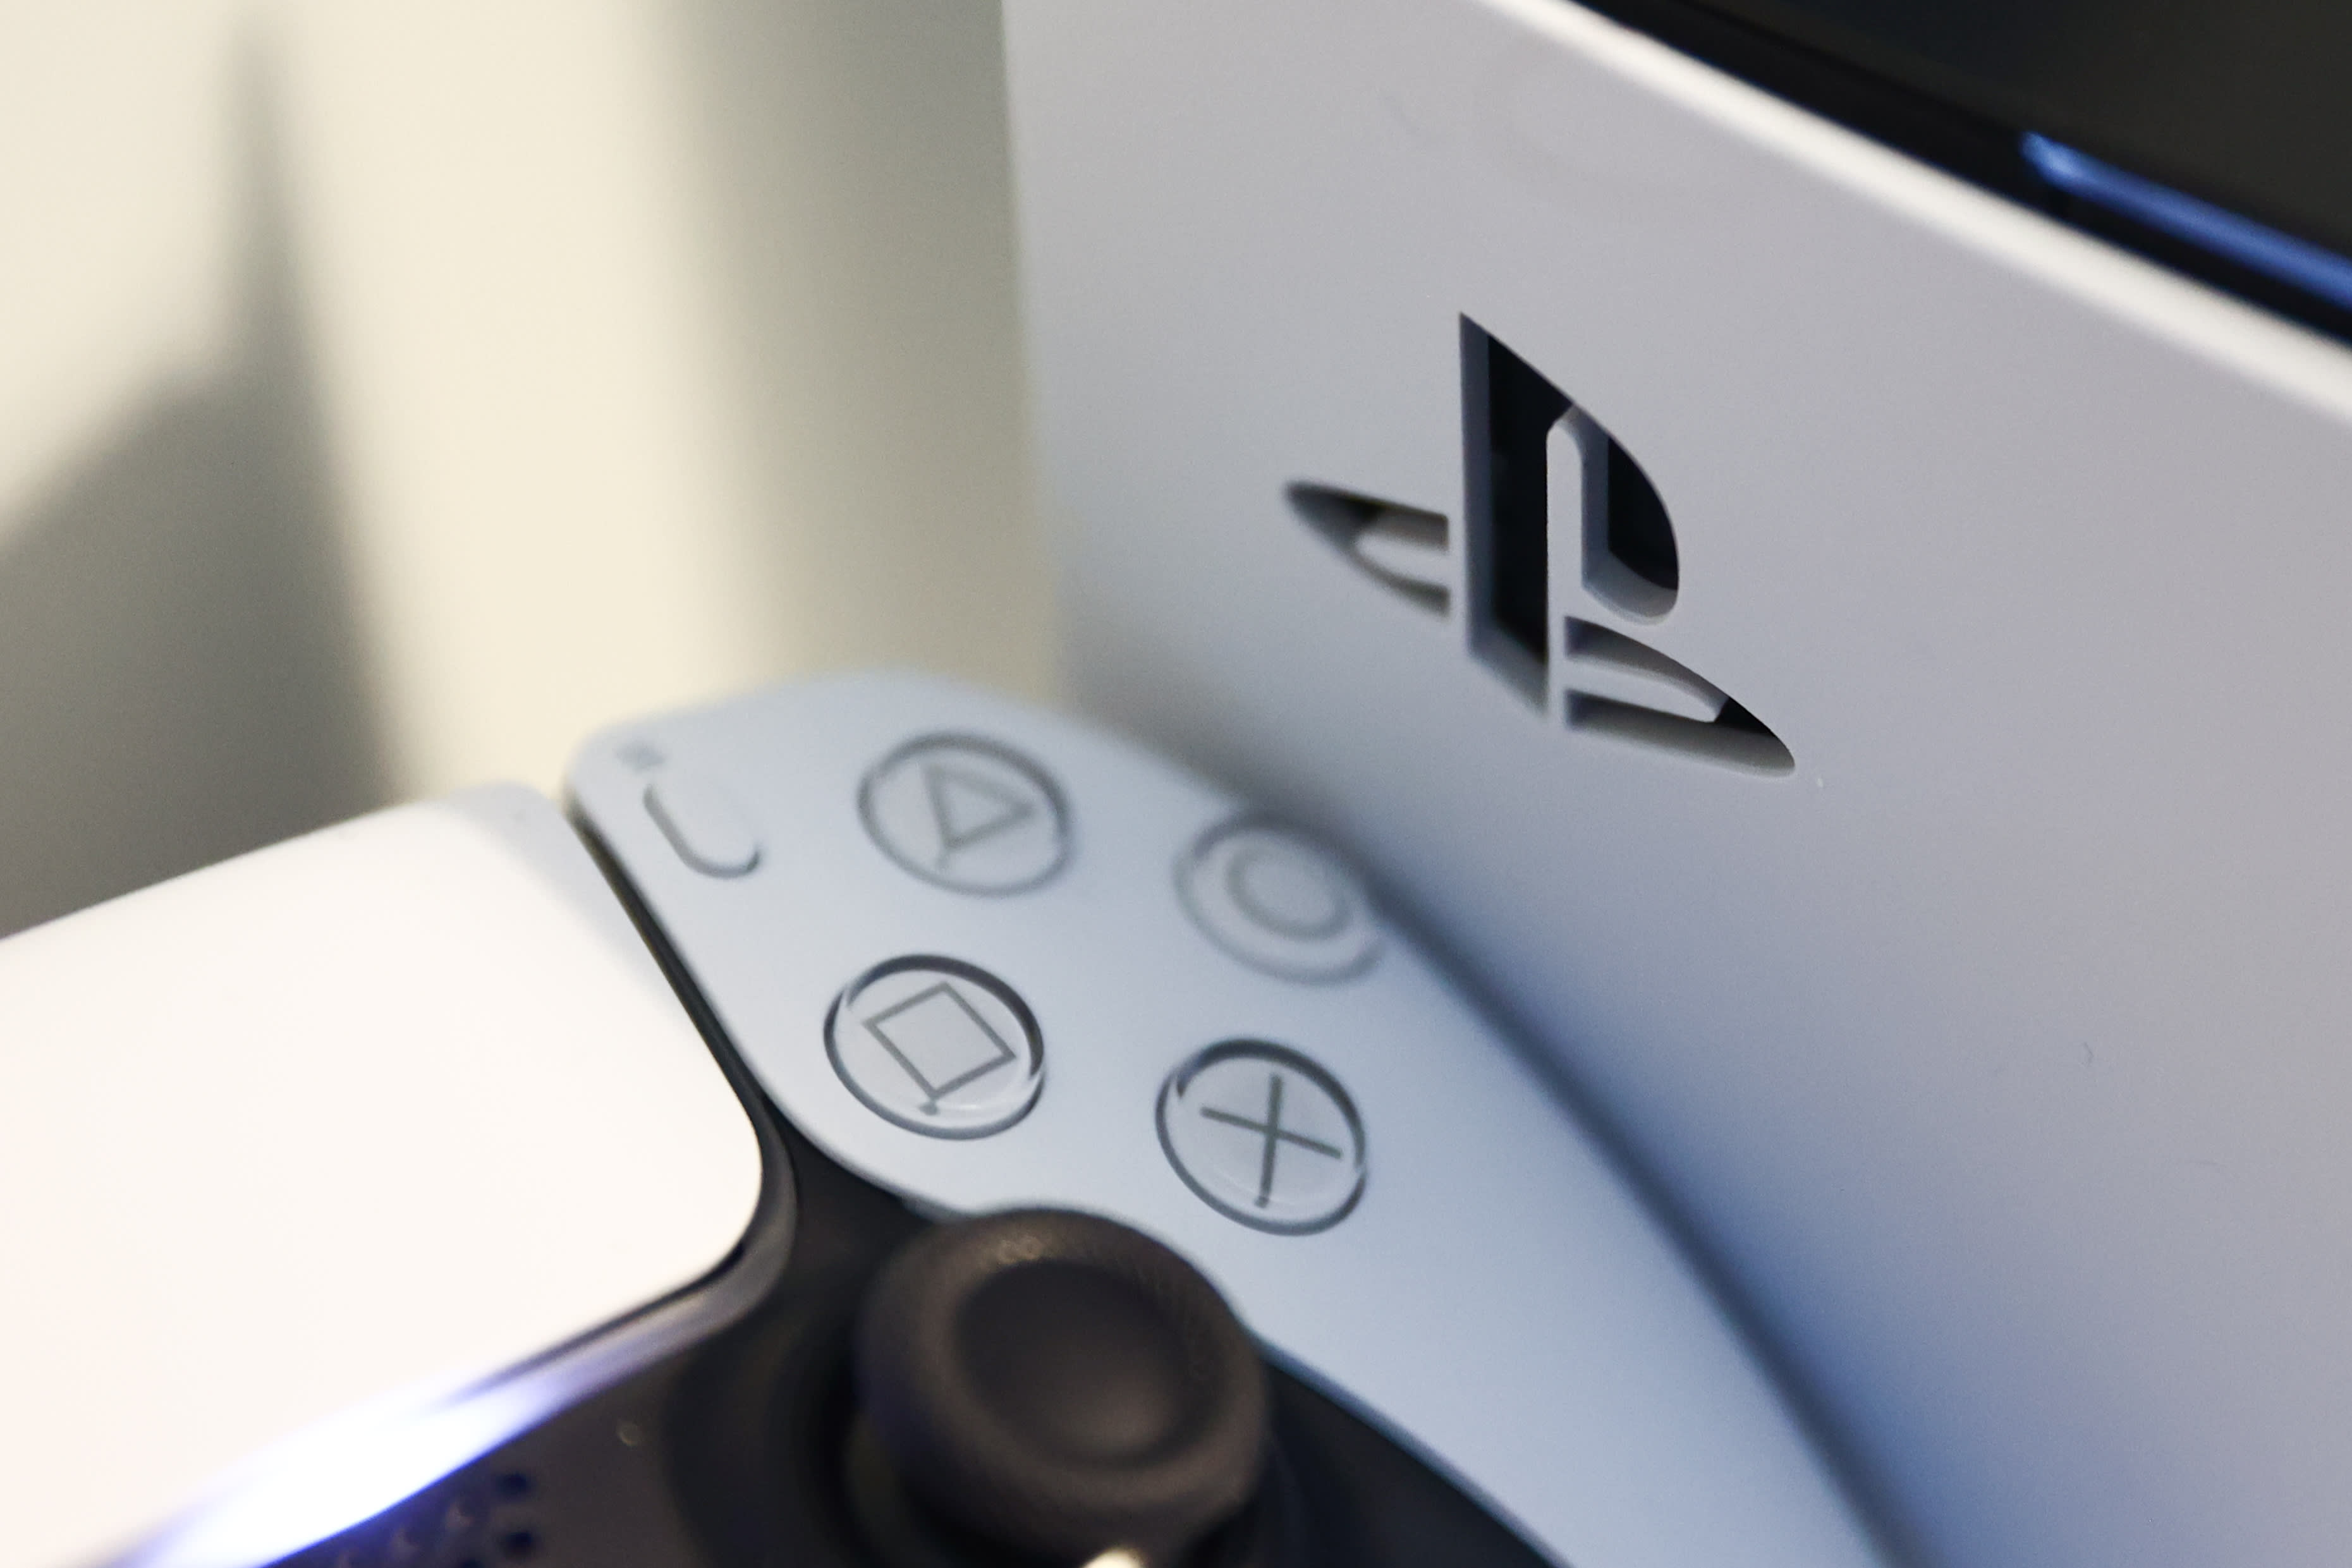 Sony, the maker of PlayStation, is investing in African gaming startup Carry1st